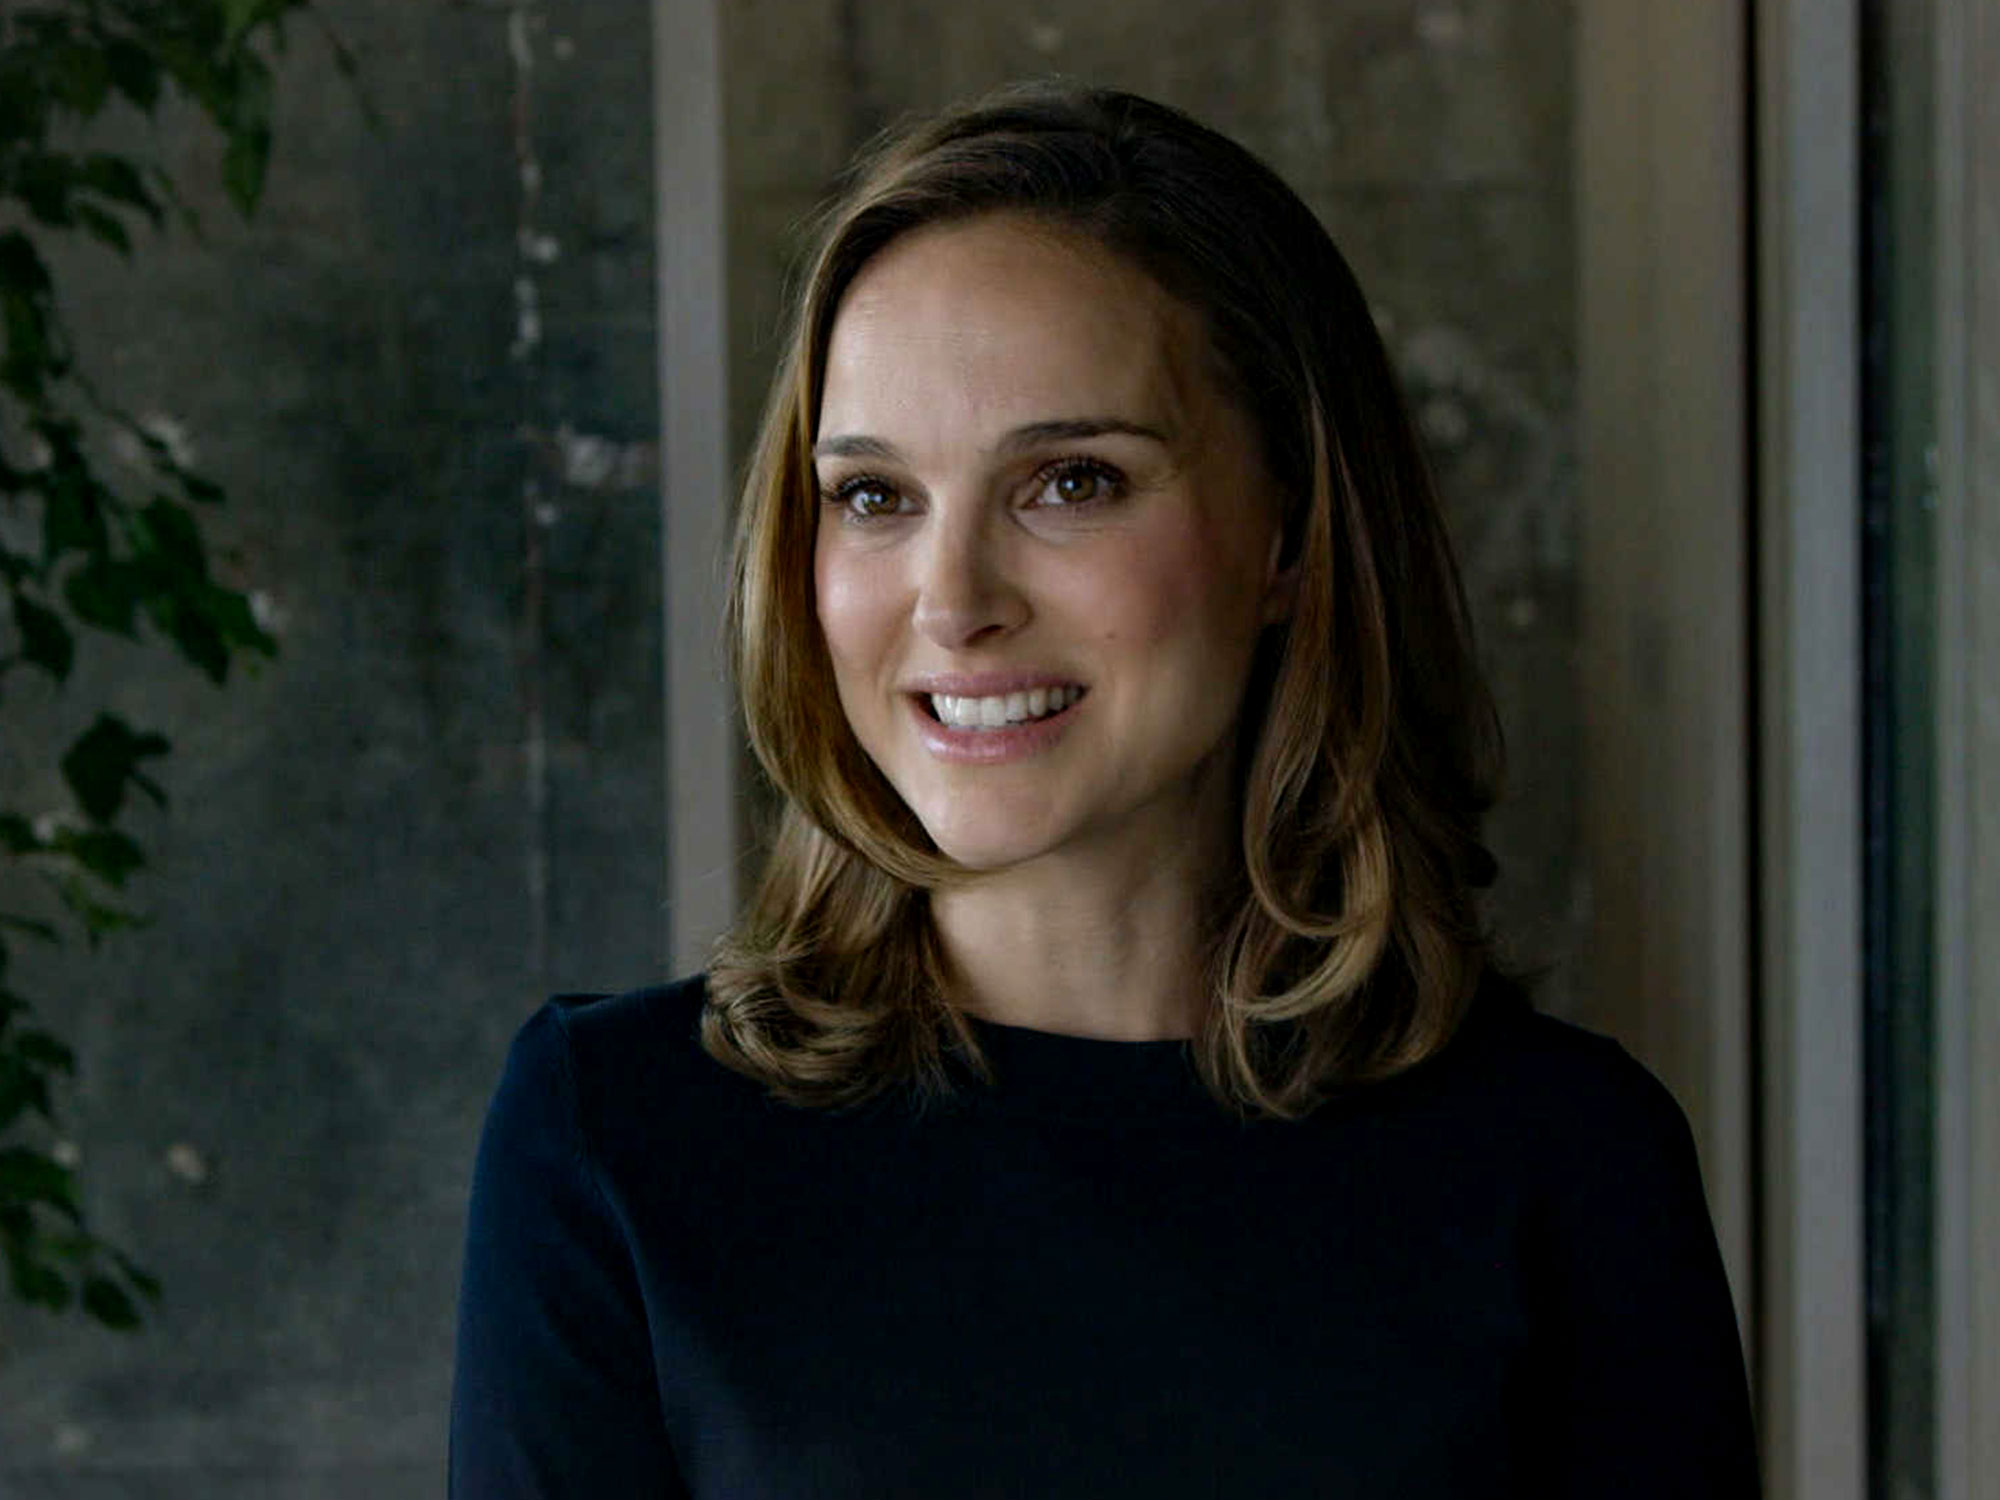 Natalie Portman in This Changes Everything (2018)